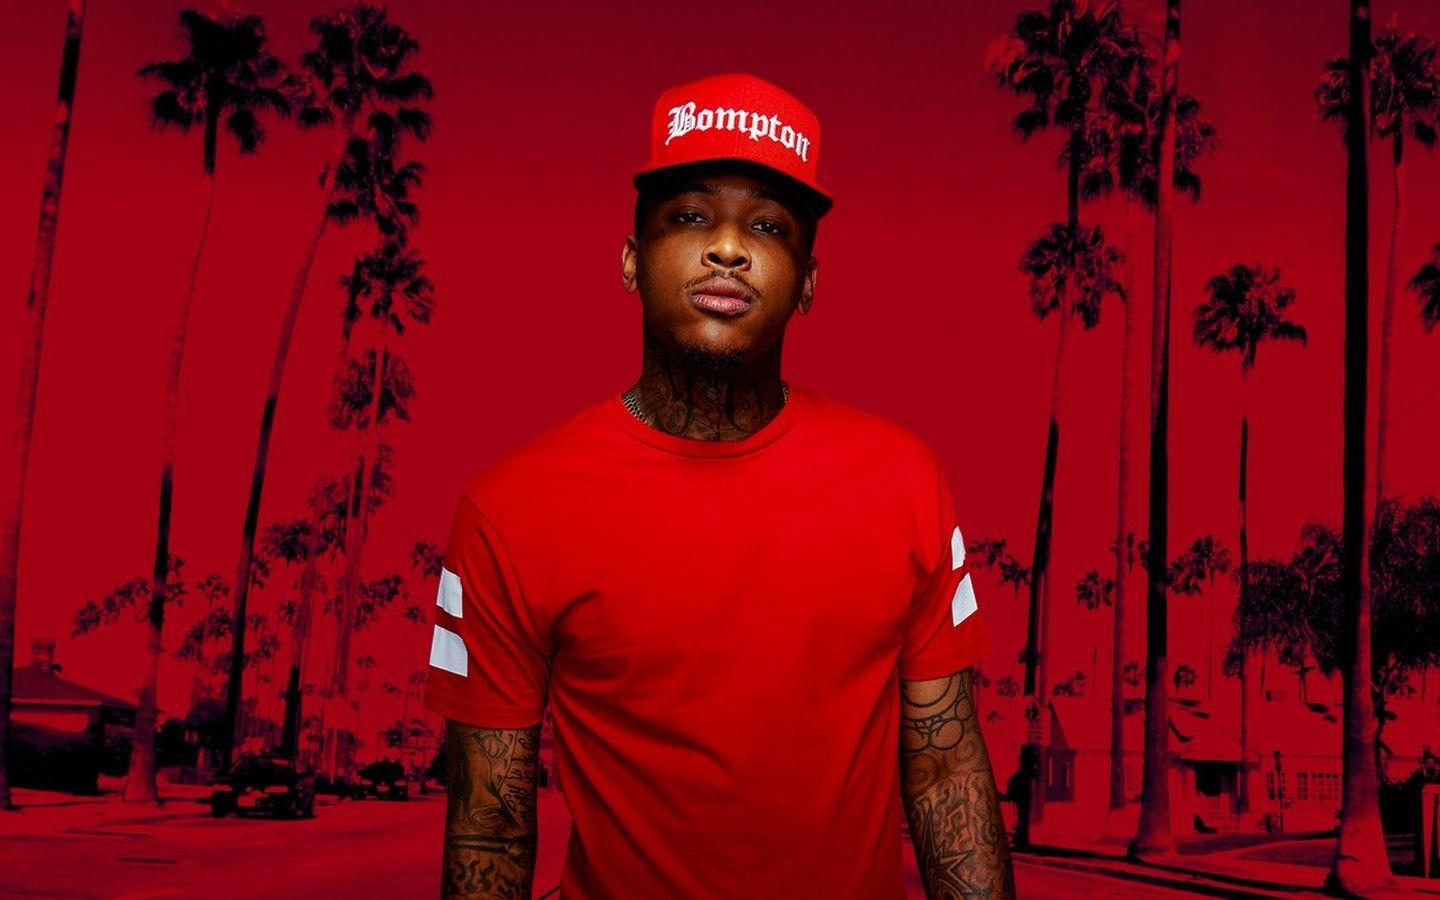 YG the Rapper Wallpaper Free YG the Rapper Background